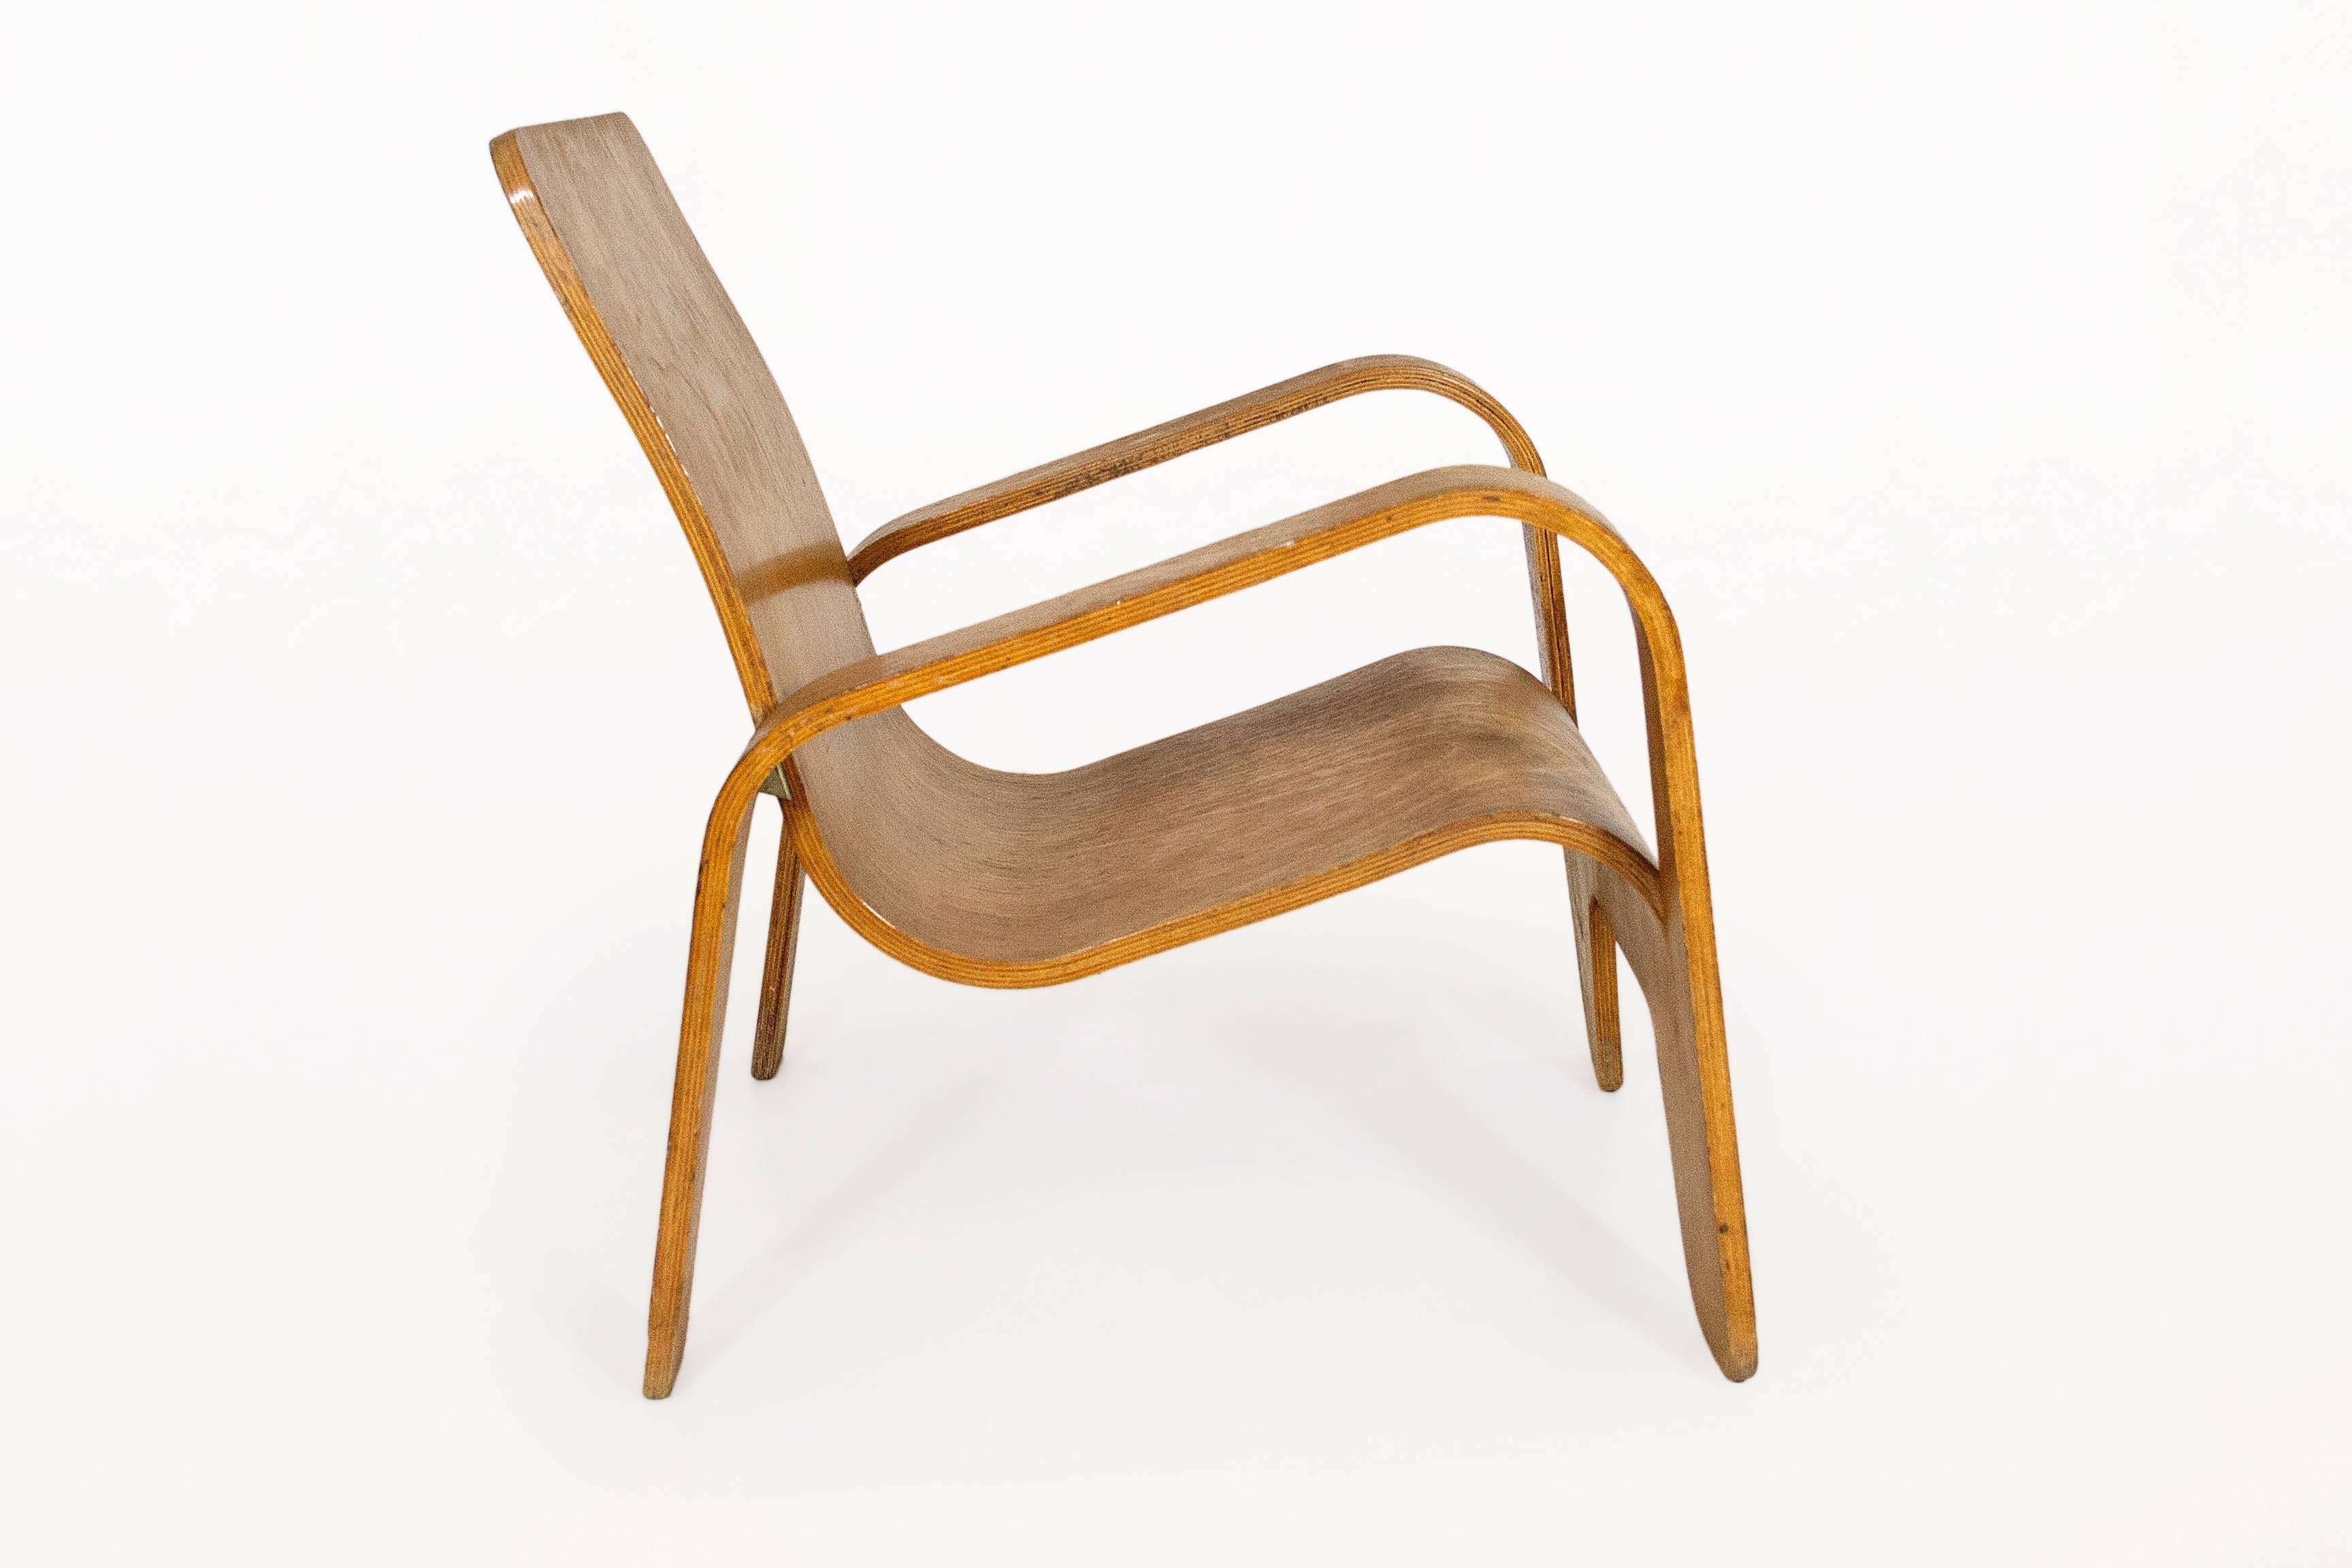 Lounge chair by Han Pieck for Lawo Ommen
Stunning design
Lounge chair made out of one piece of laminated plywood
circa 1940, Netherlands
Very good vintage condition.